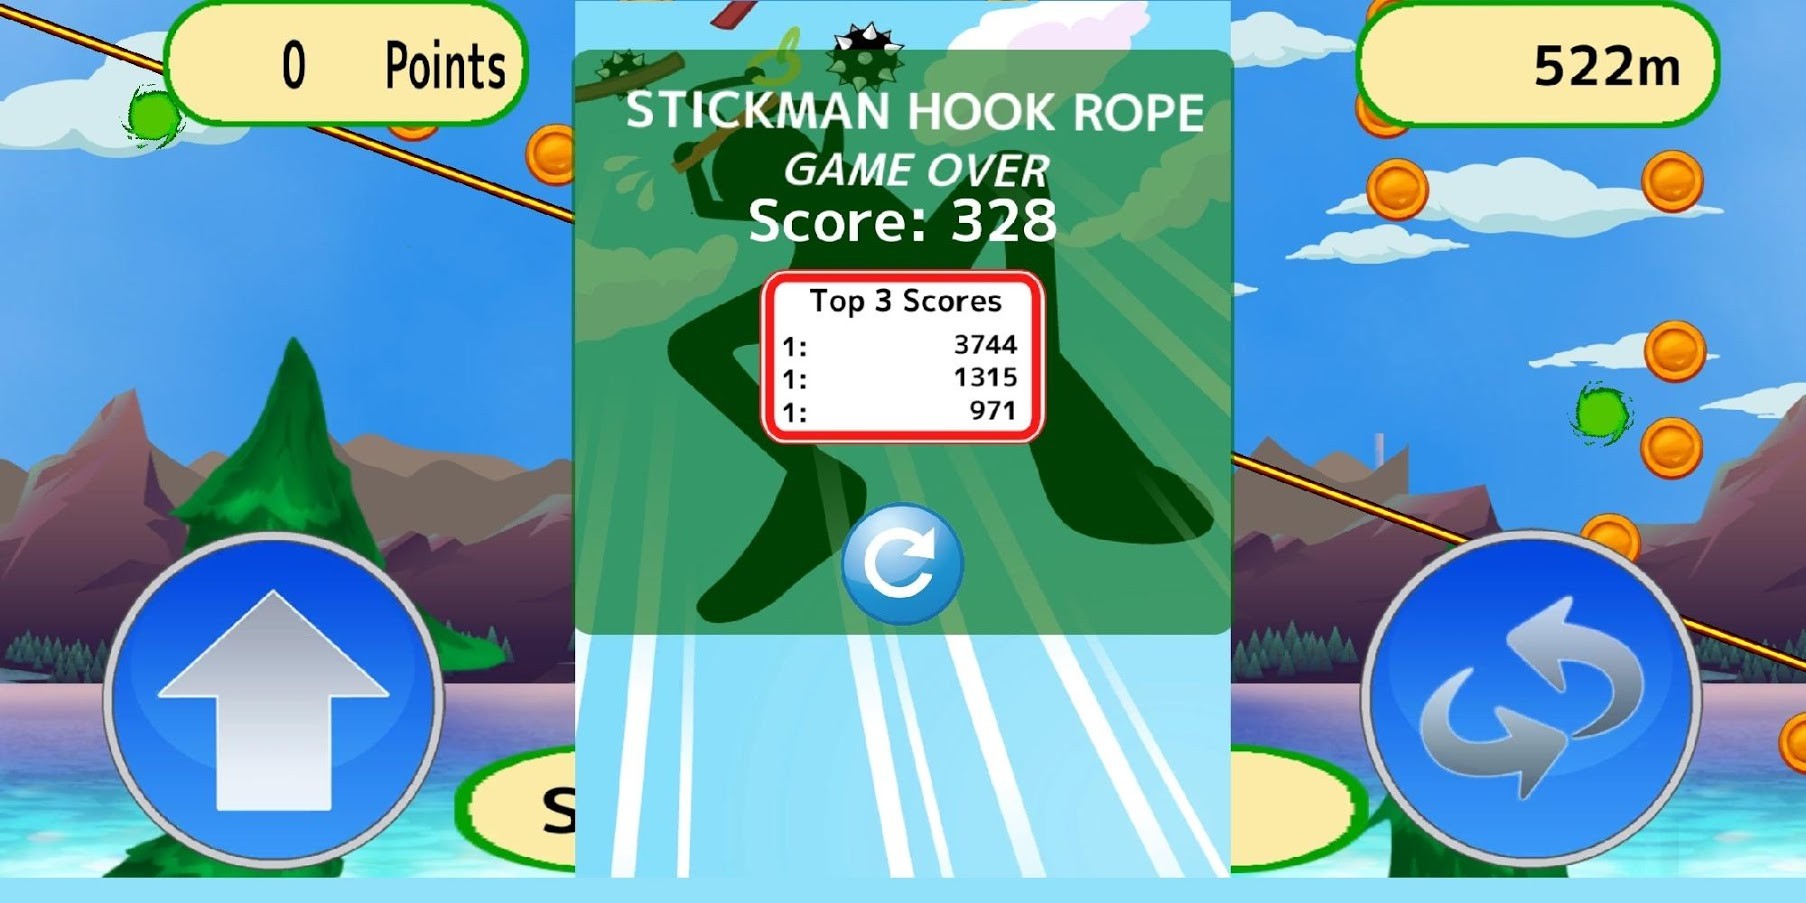 The stickman hook is here to guide you through the adventure